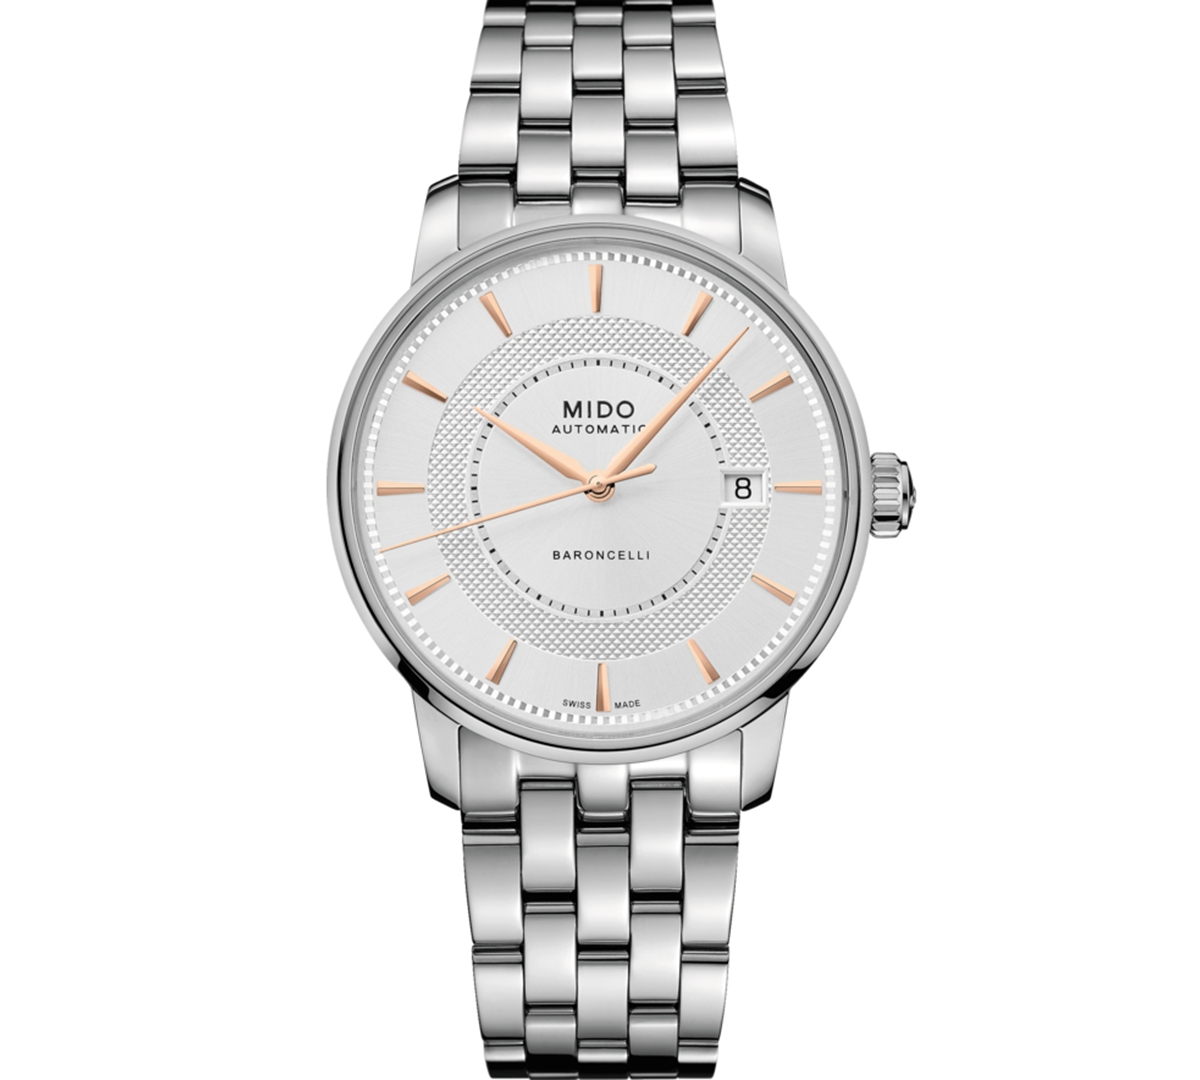 Men's Swiss Automatic Baroncelli Signature Stainless Steel Bracelet Watch 39mm - Silver